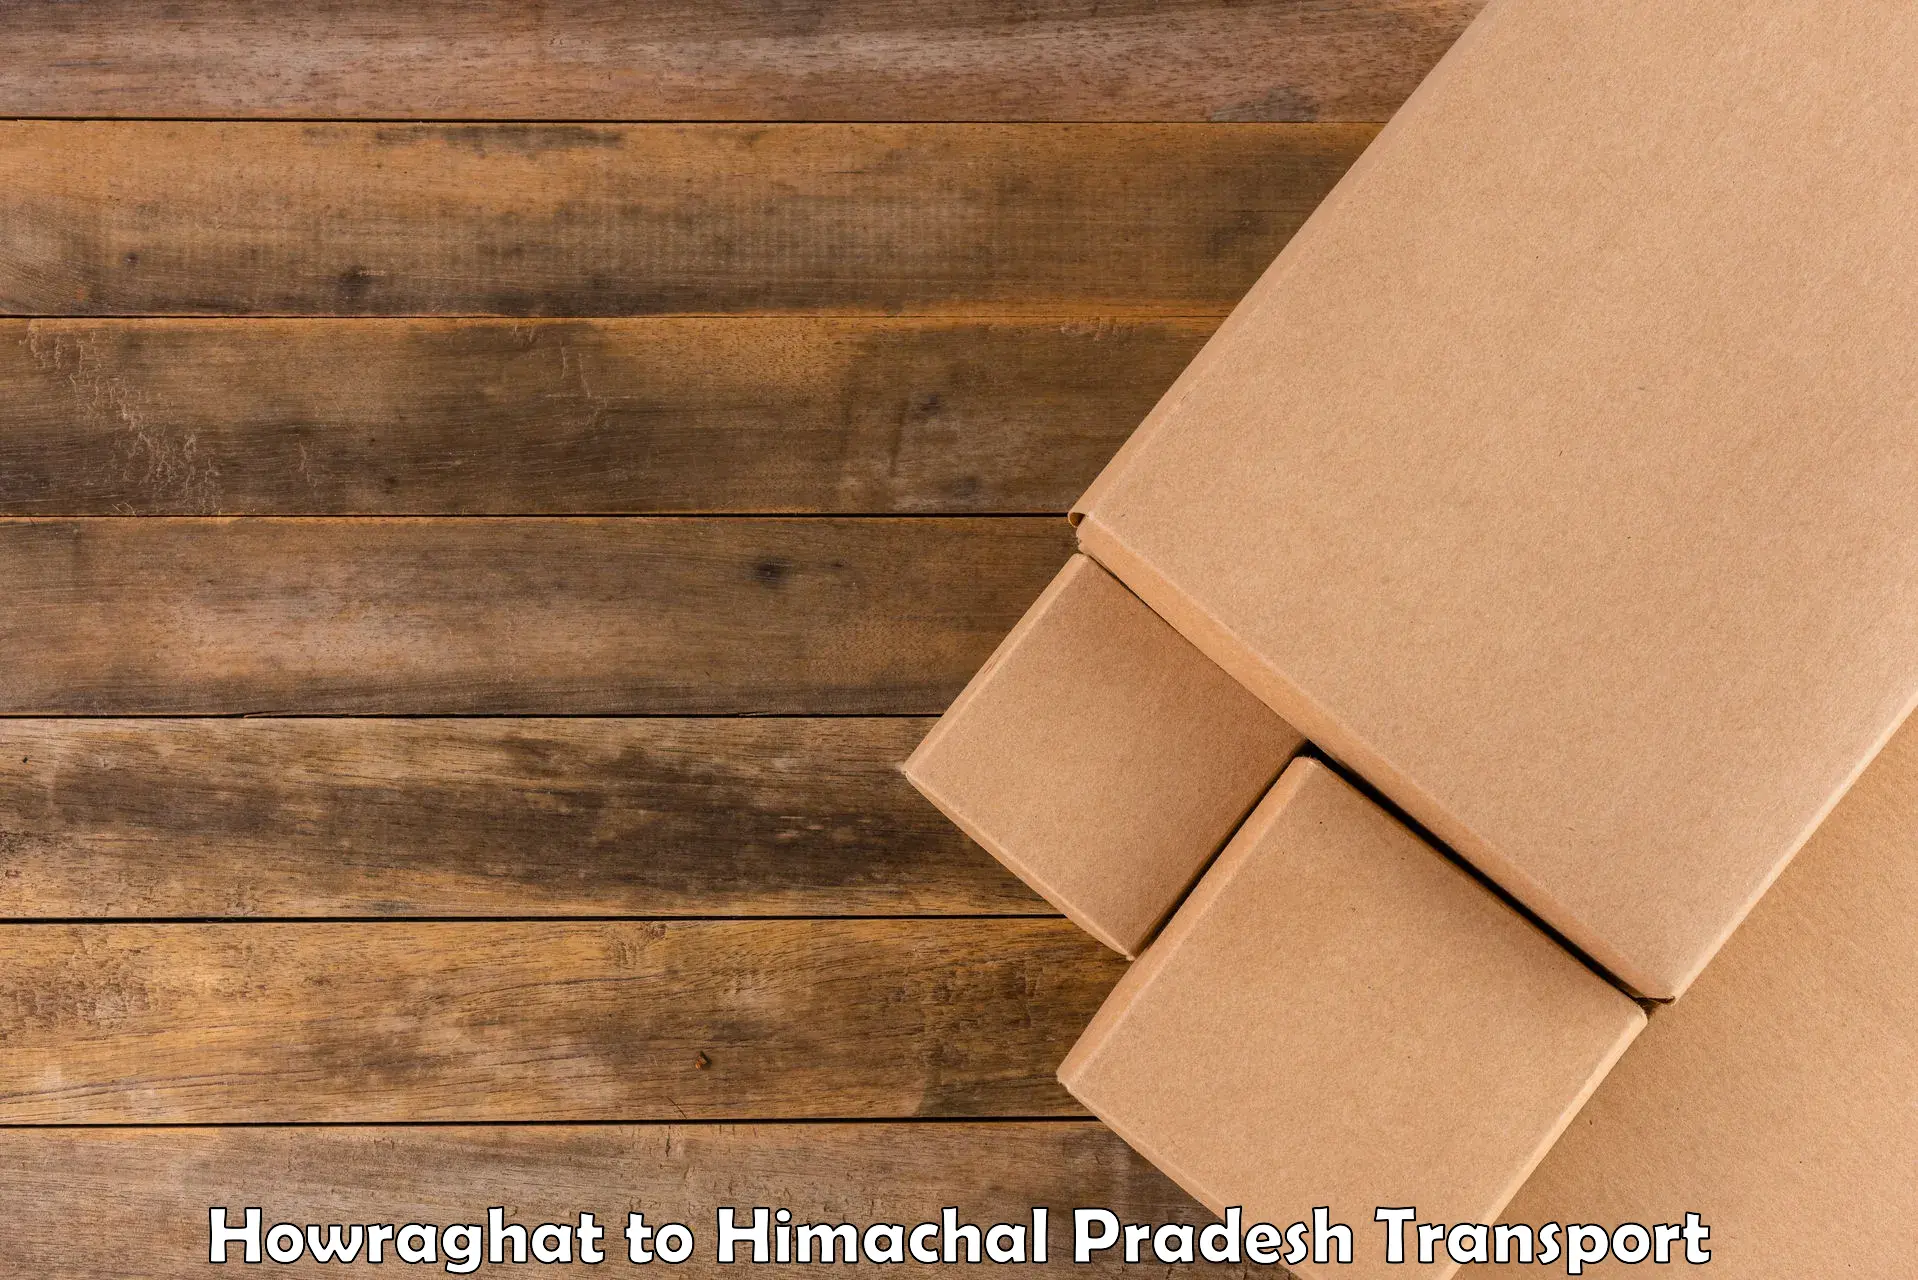 Air freight transport services Howraghat to Nalagarh